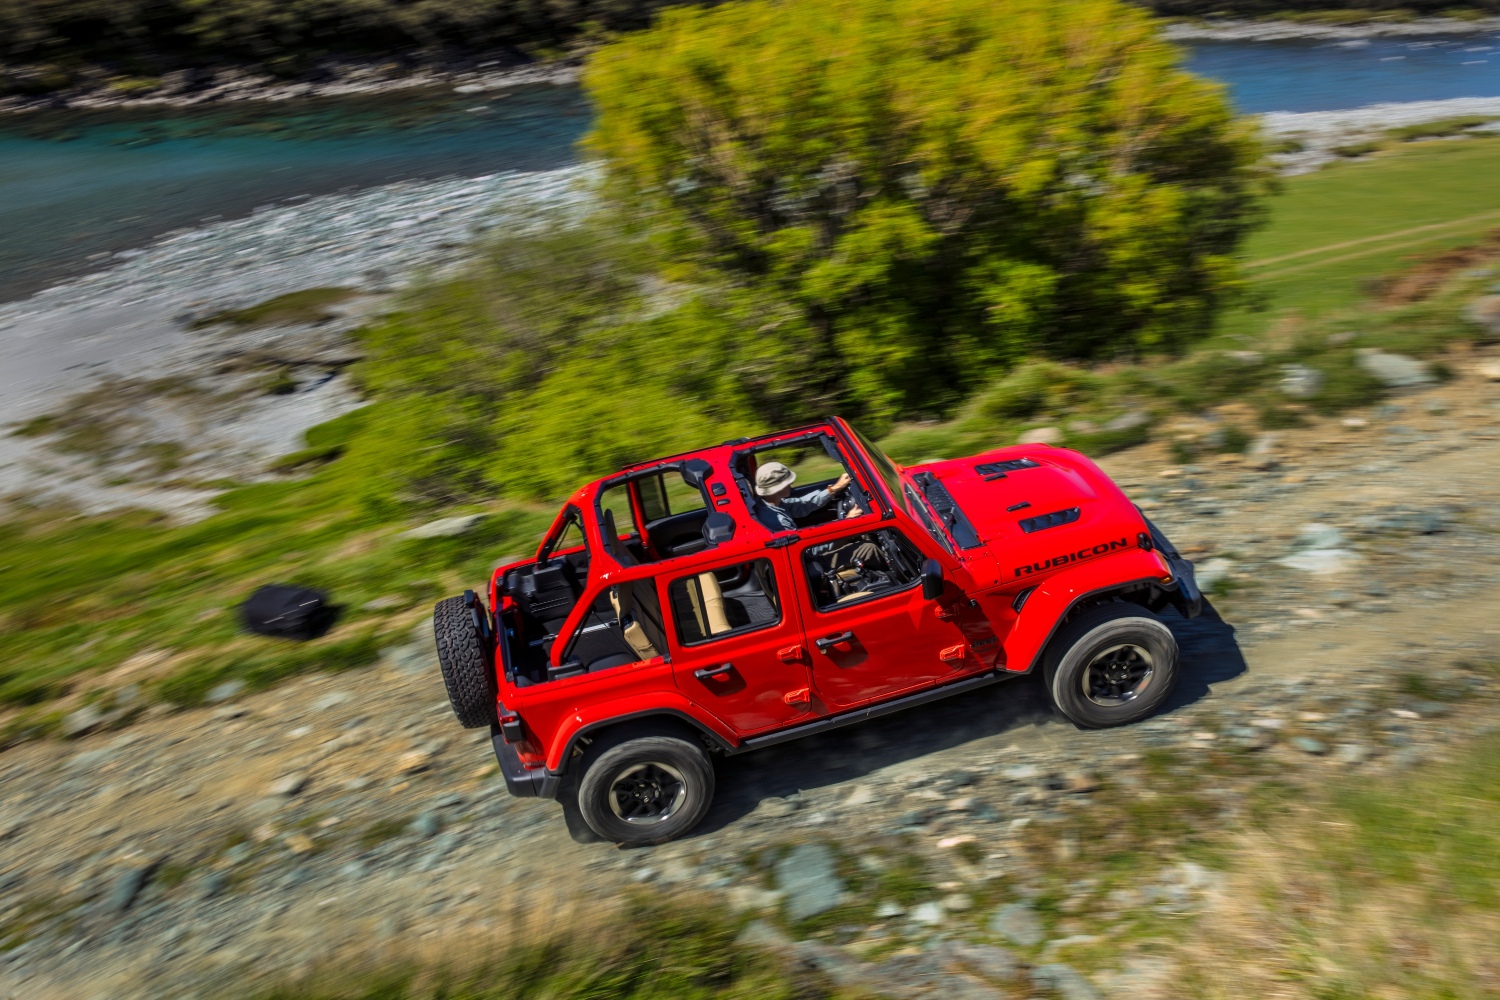 The best SUVs for dogs and dog owners in 2022 include the Jeep Wrangler